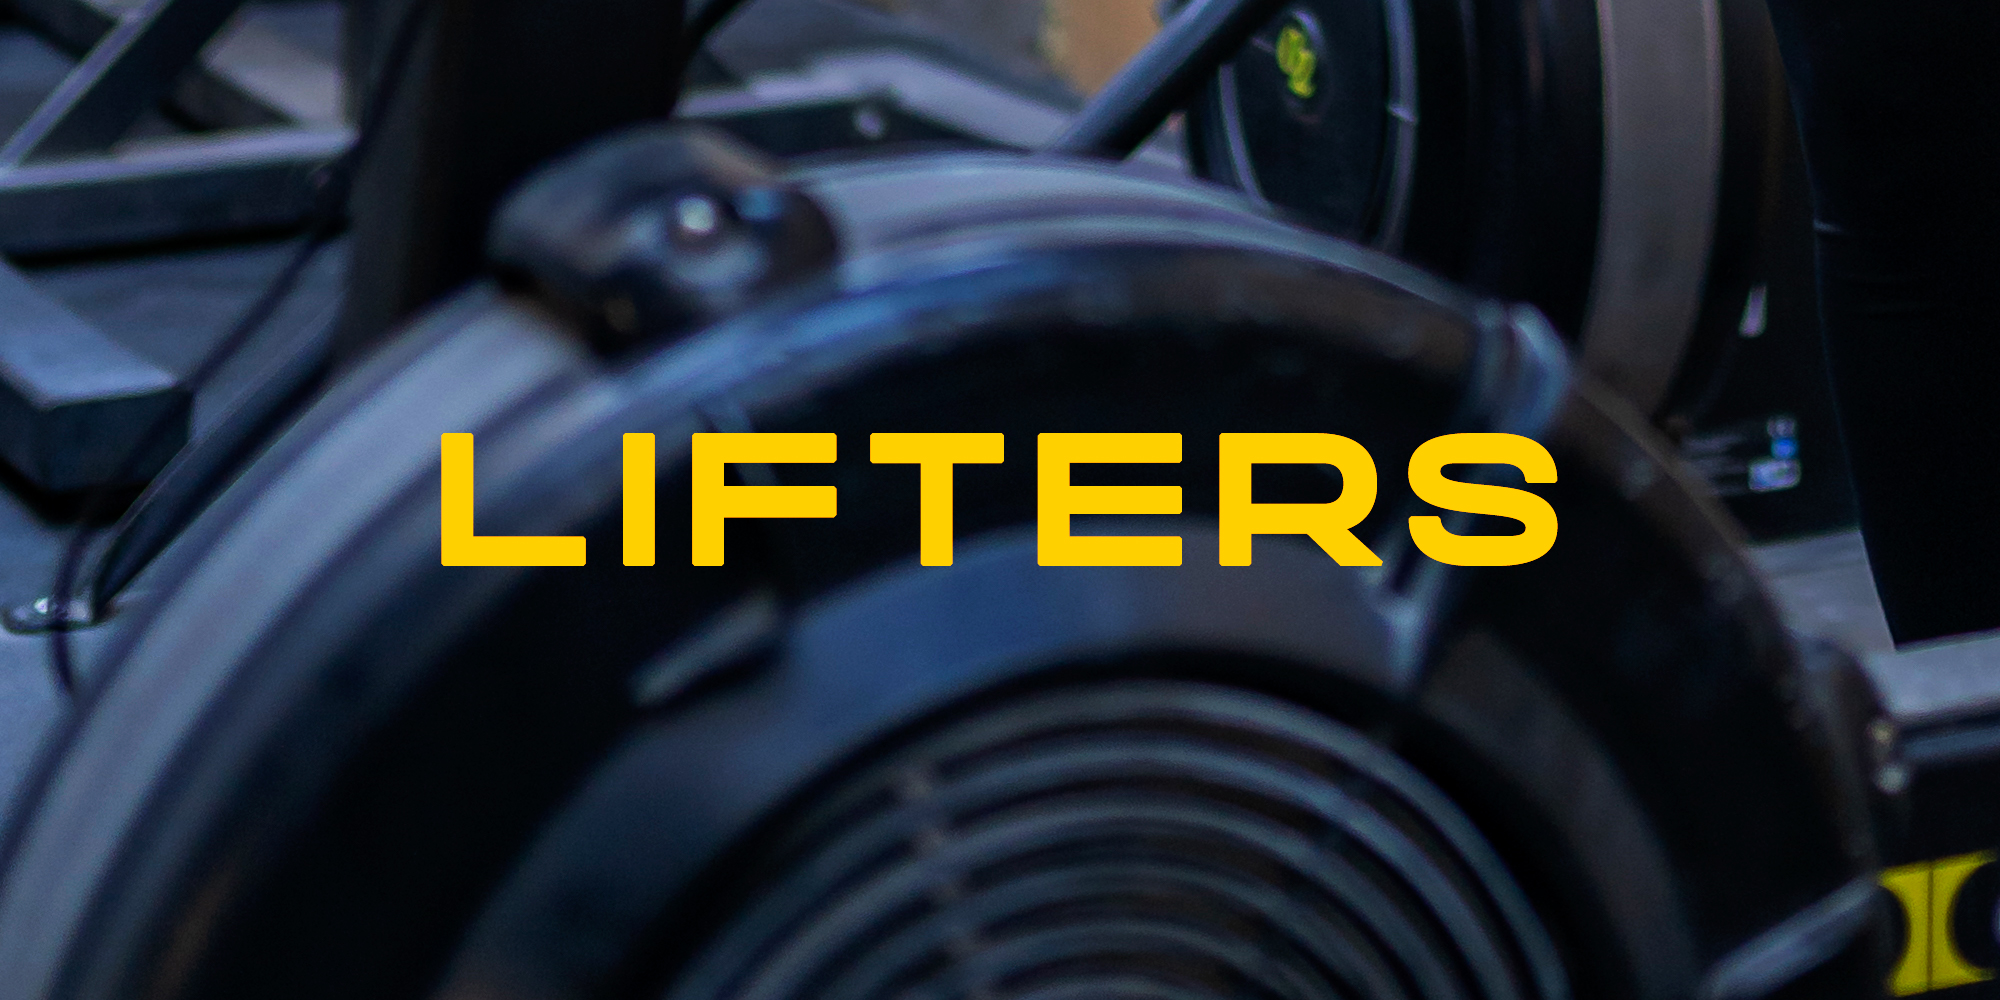 lifters1